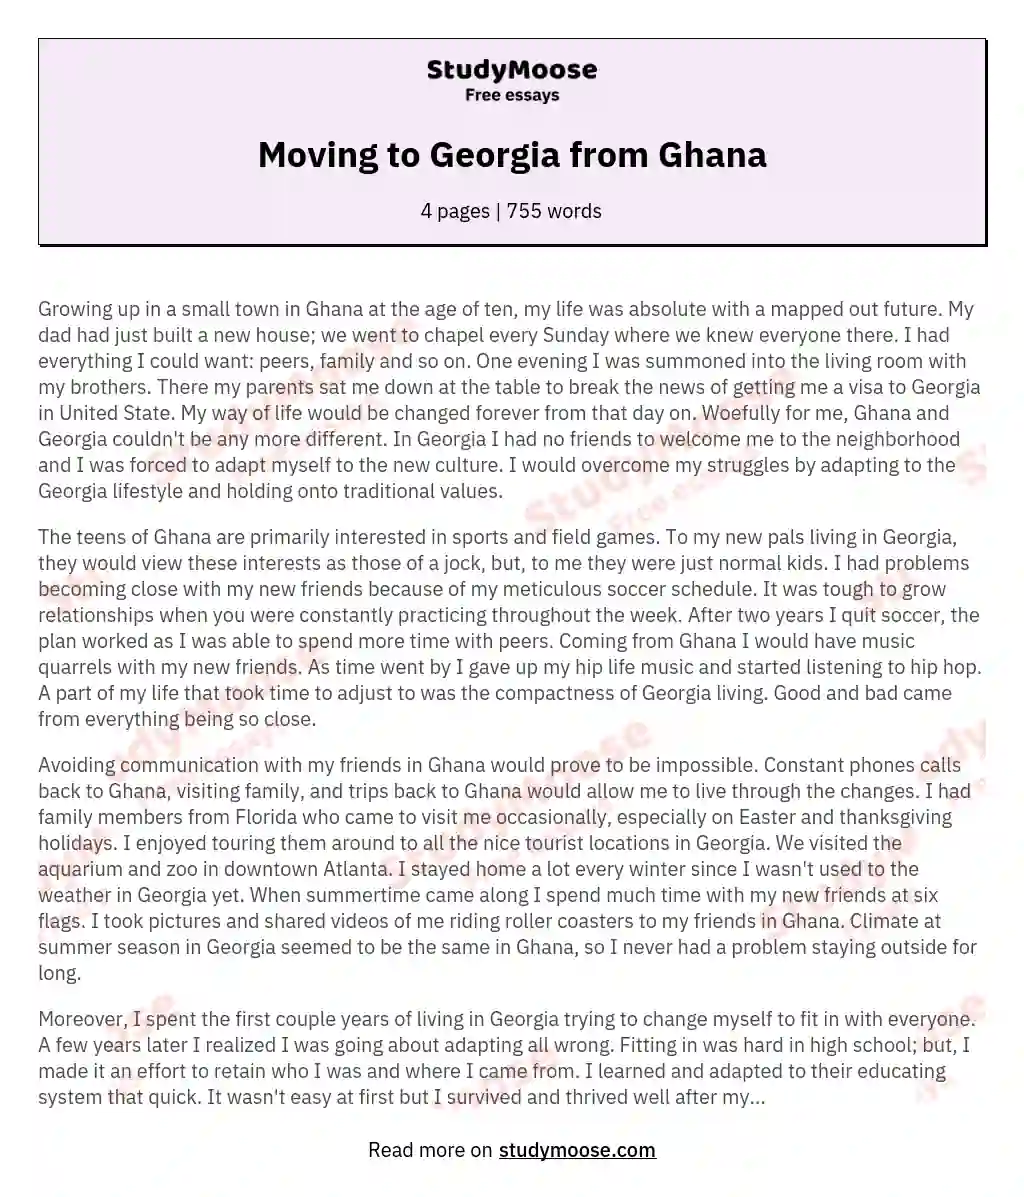 Moving to Georgia from Ghana essay